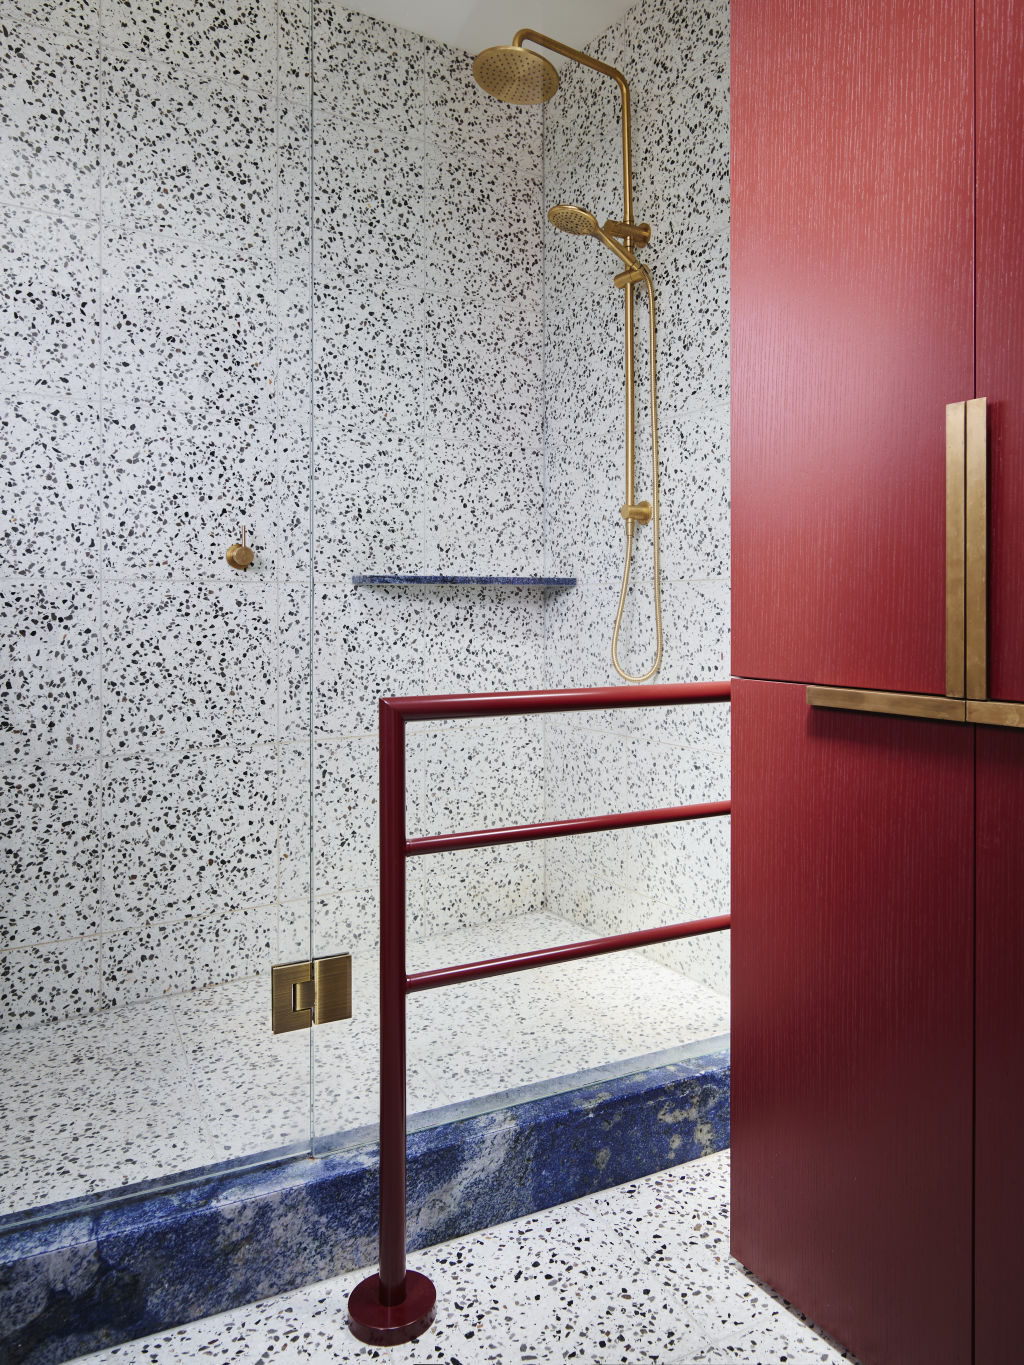 This Caulfield North bathroom by Flack Studio features  floor-to-ceiling terrazzo. Photo: Anson Smart